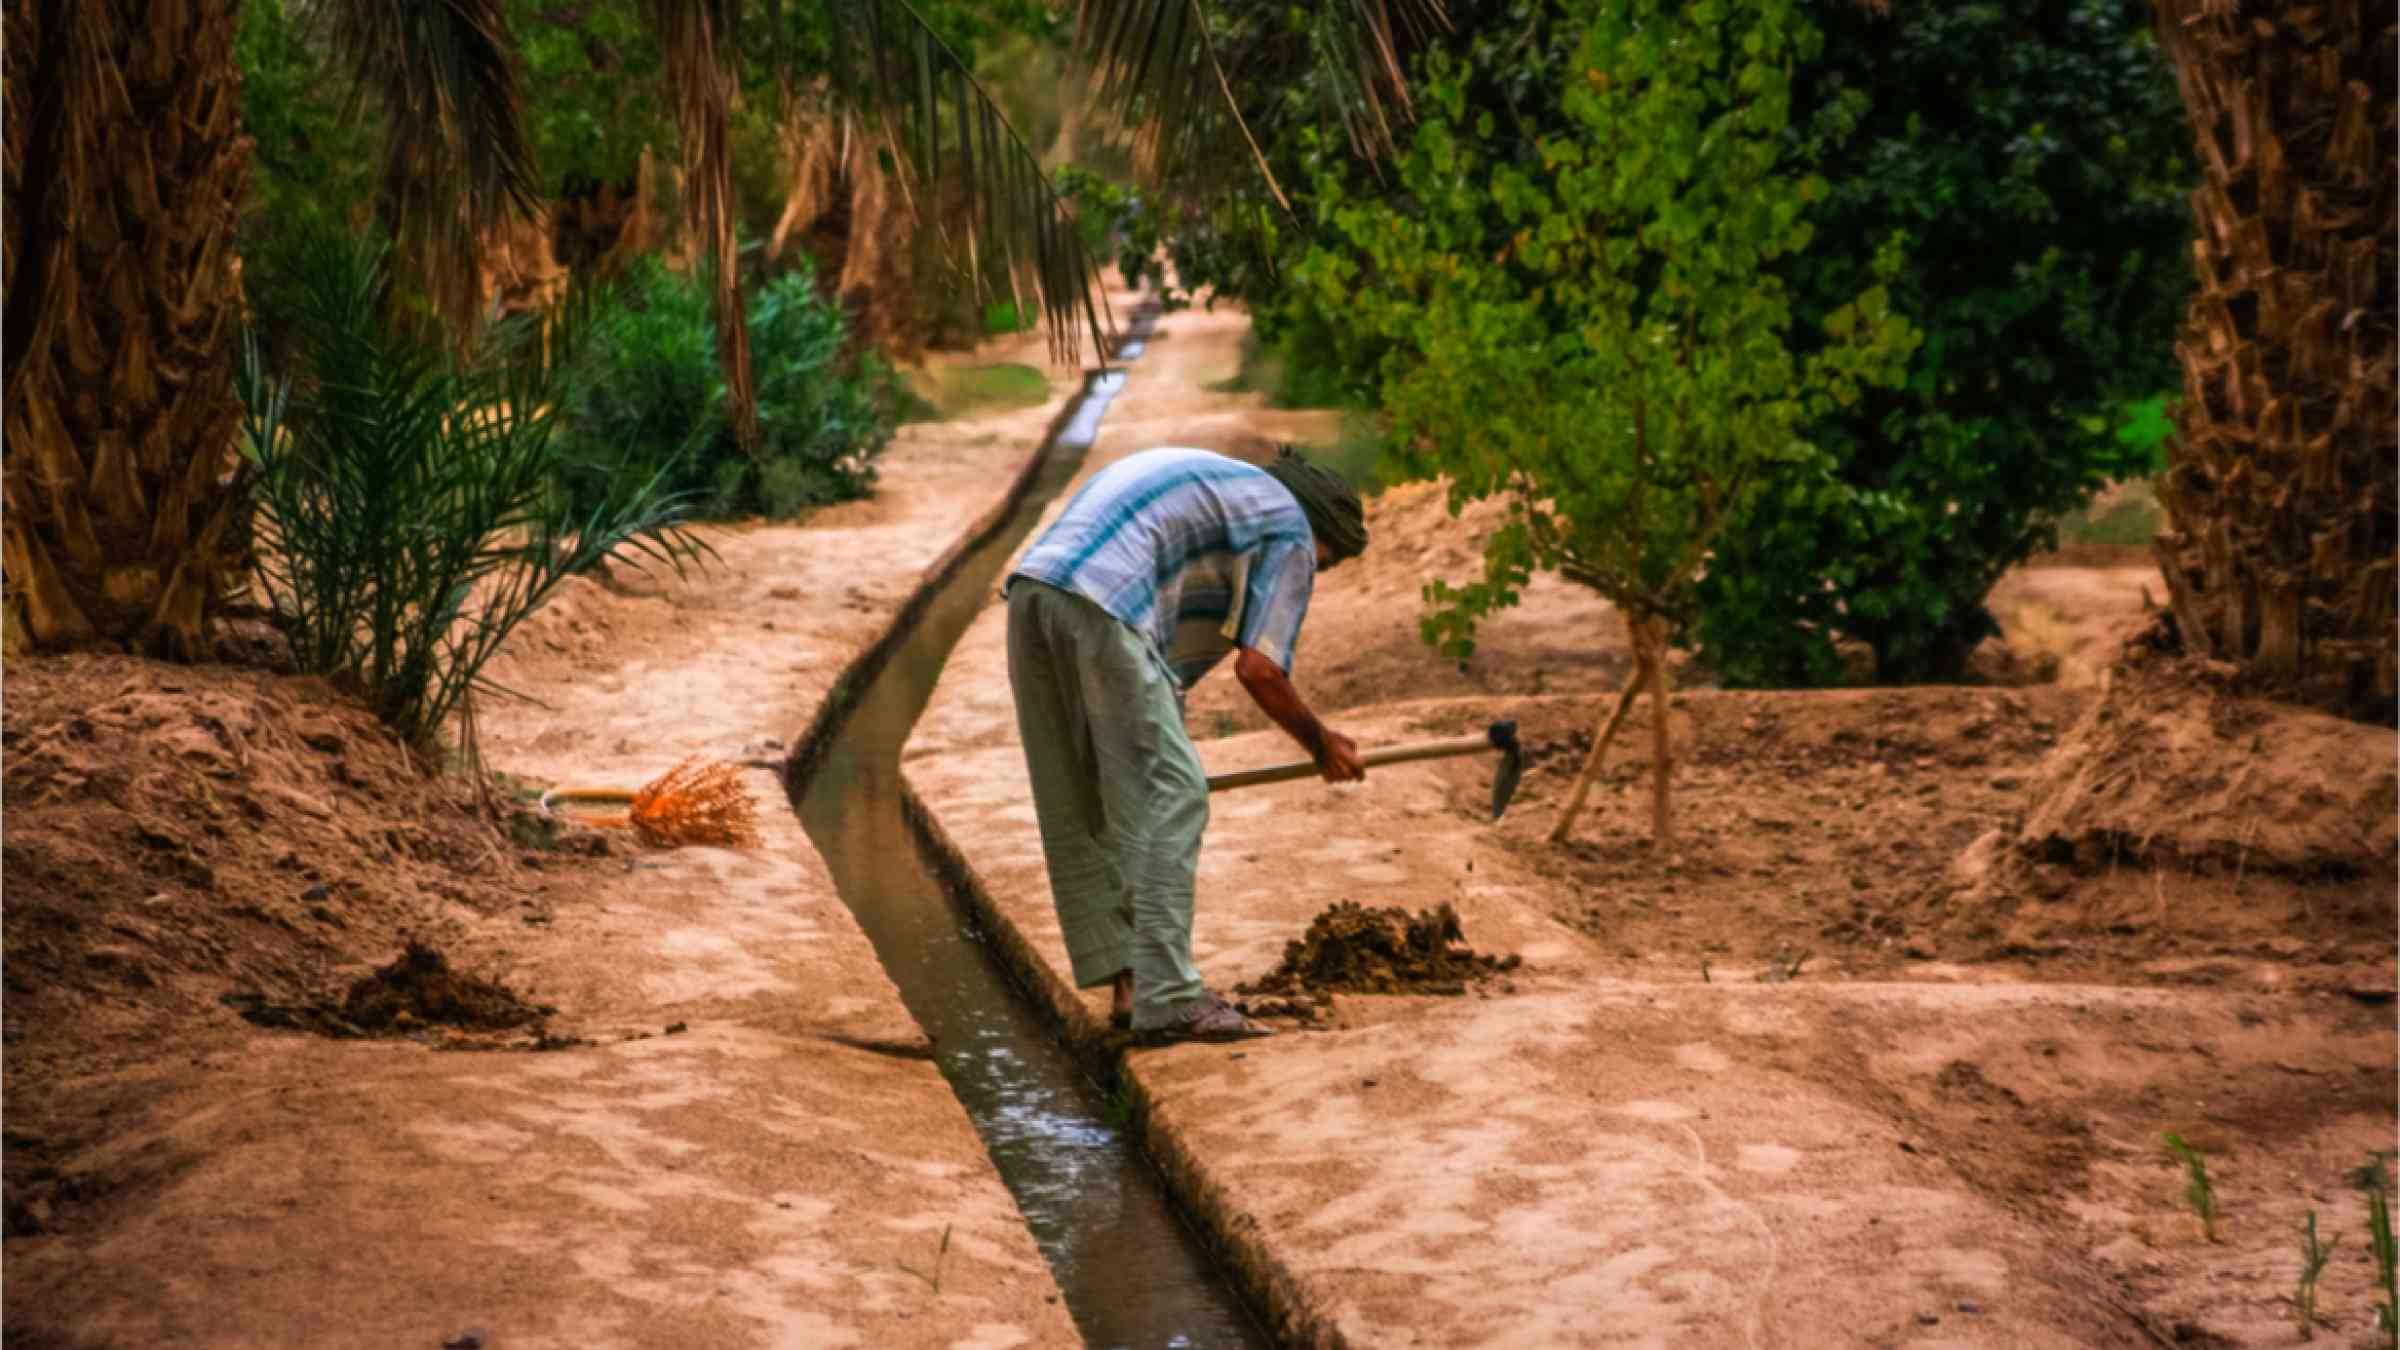 A man working on an irrigation canal, in an oasis in the Sahara, Morocco.